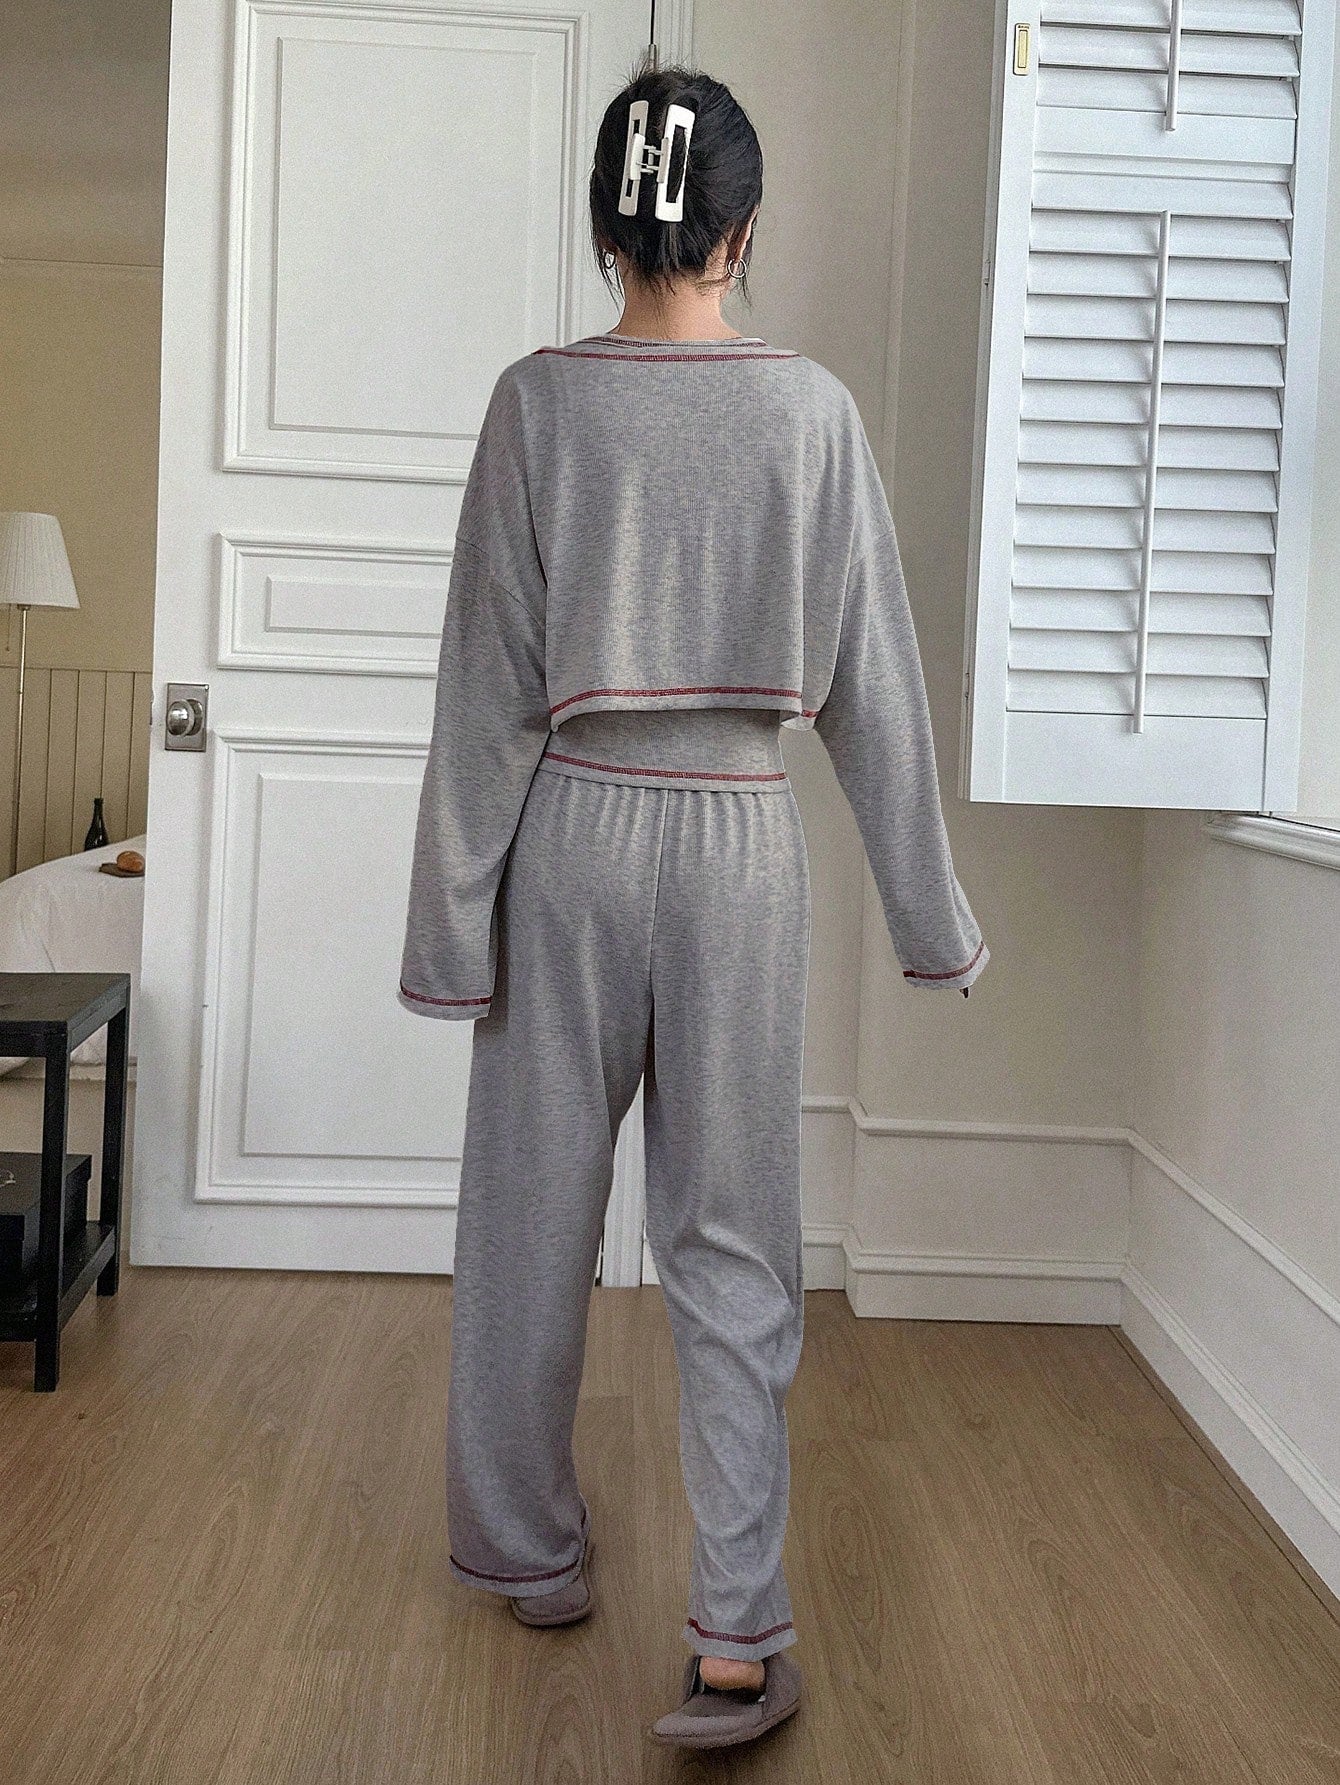 Women's Loose-Fitting Home Wear Set, See-Through